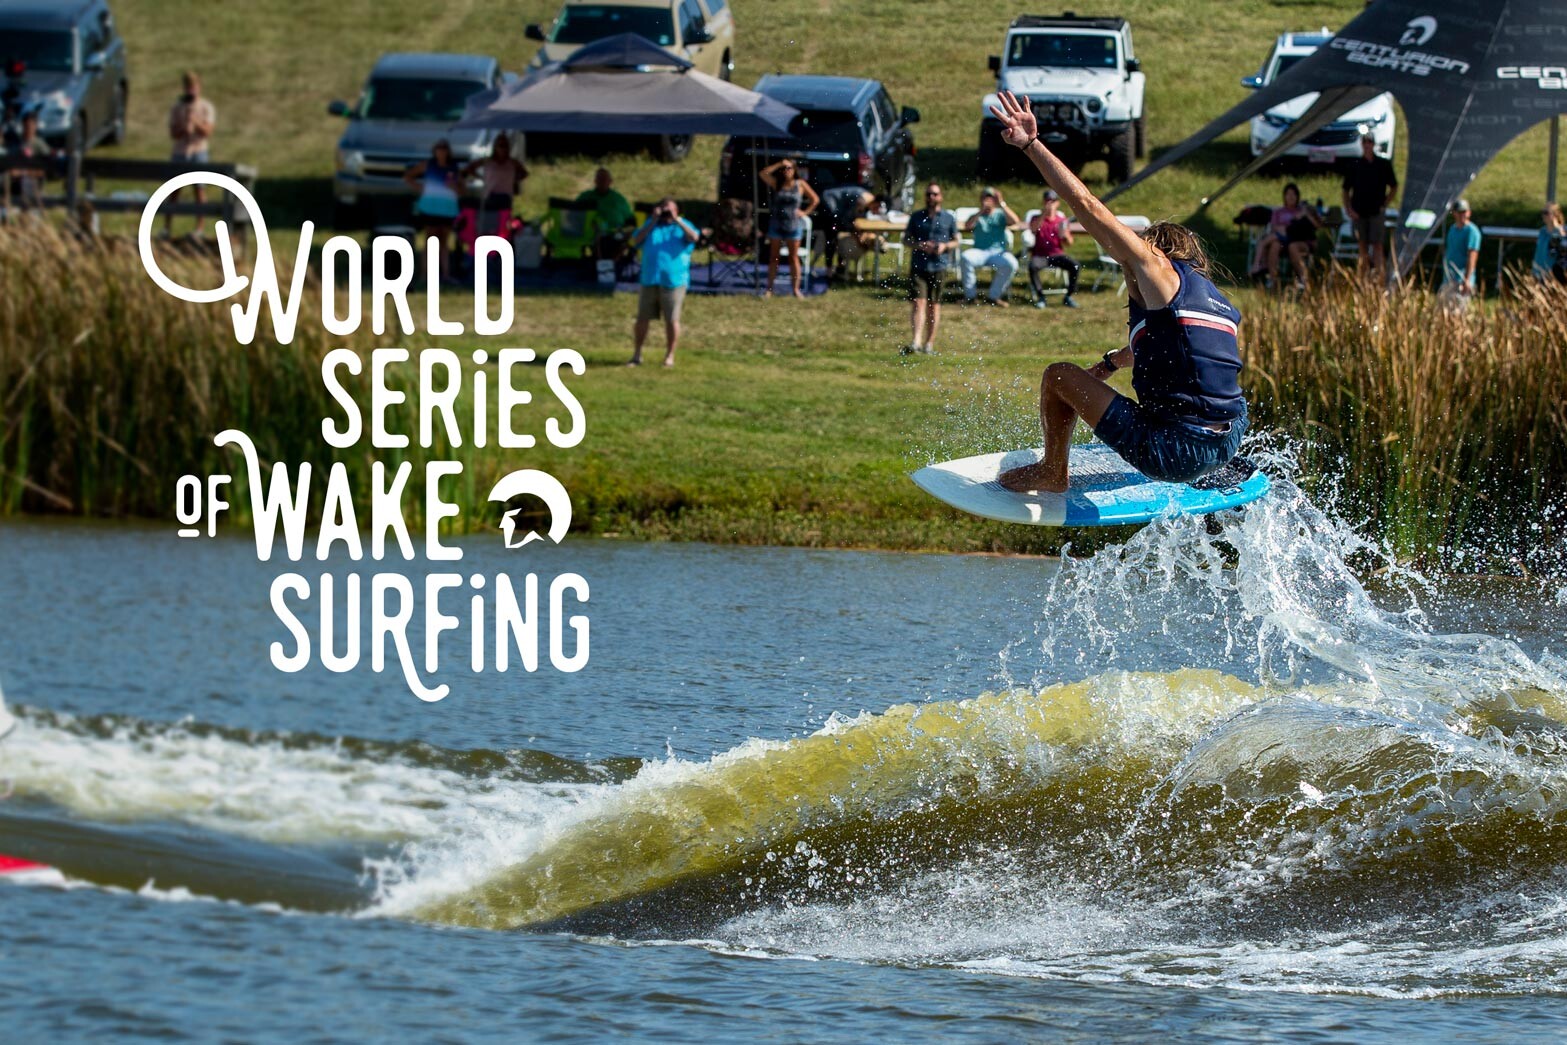 The World Series of wake surfing is an exhilarating competition that attracts surfers and fans from all around the globe.